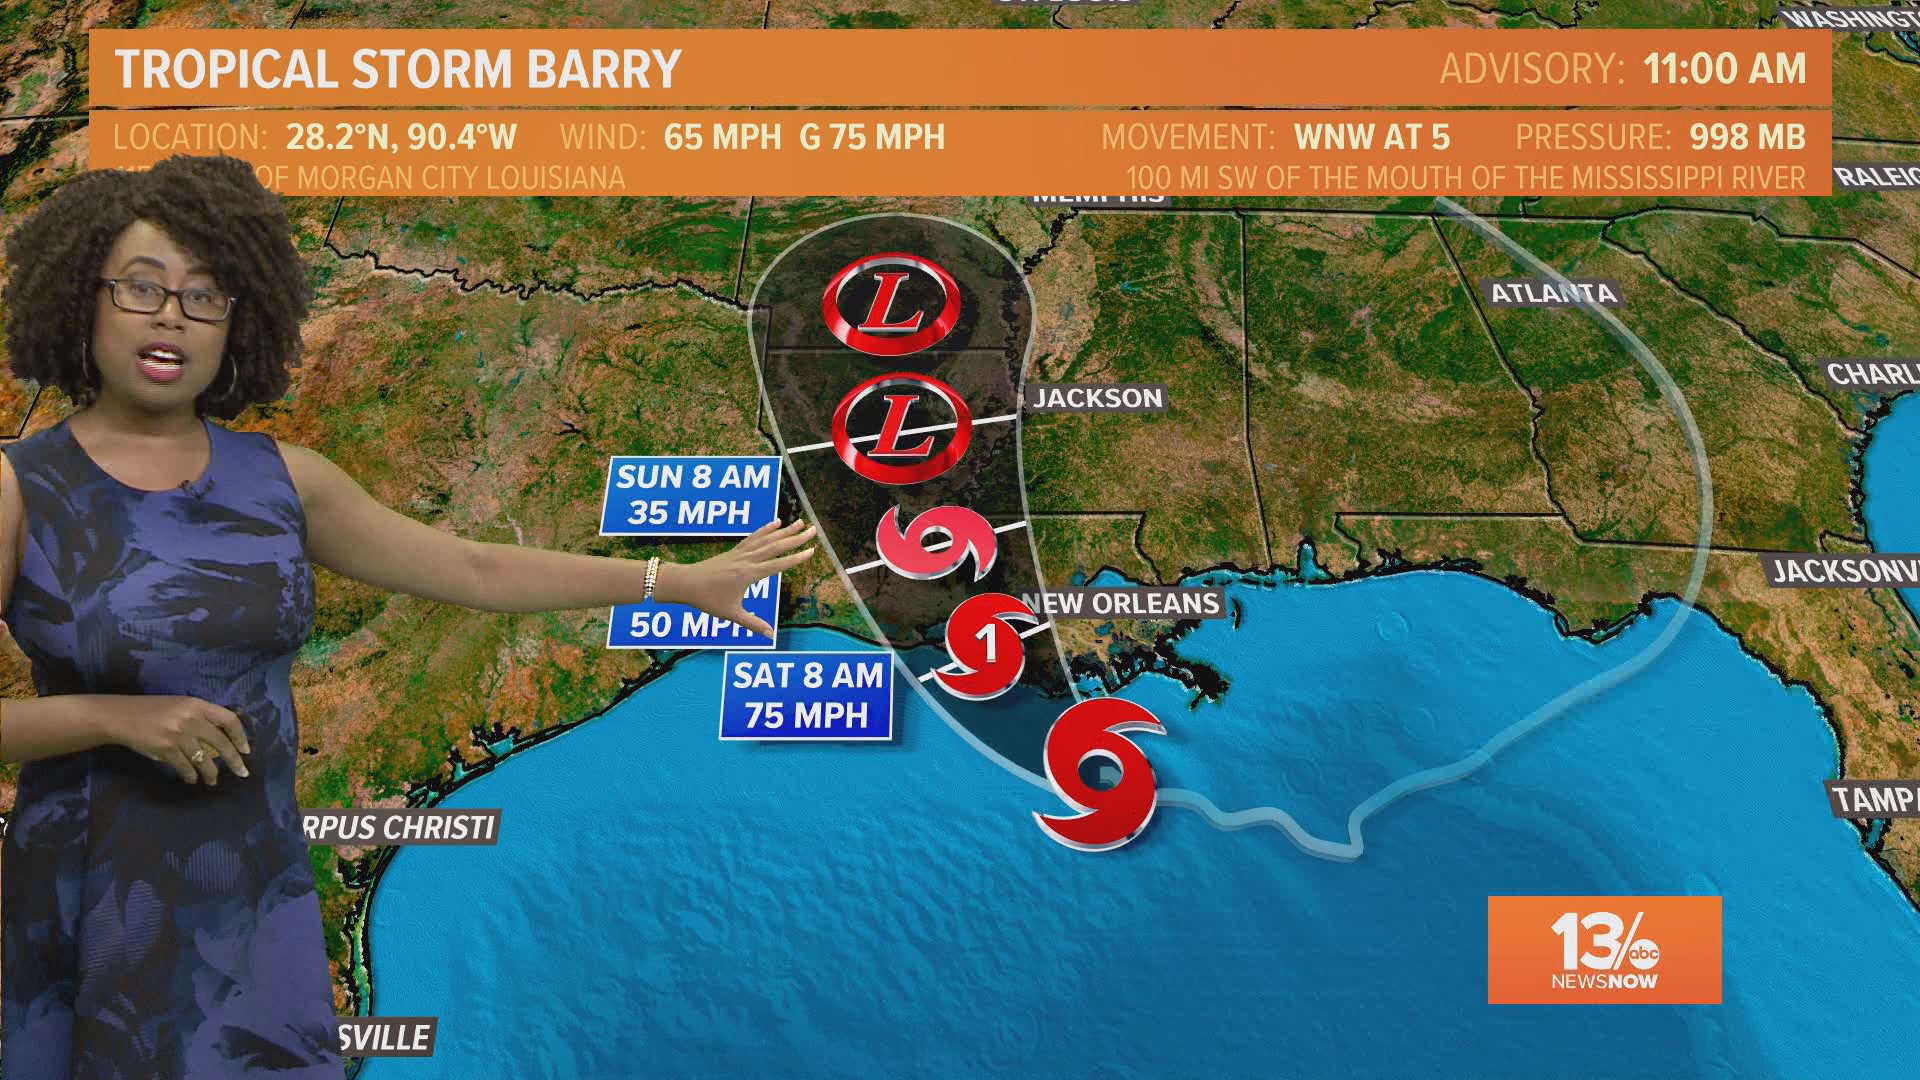 Friday update: Tropical Storm Barry is strengthening as it moves closer to the Louisiana coast, and could become a hurricane before landfall.